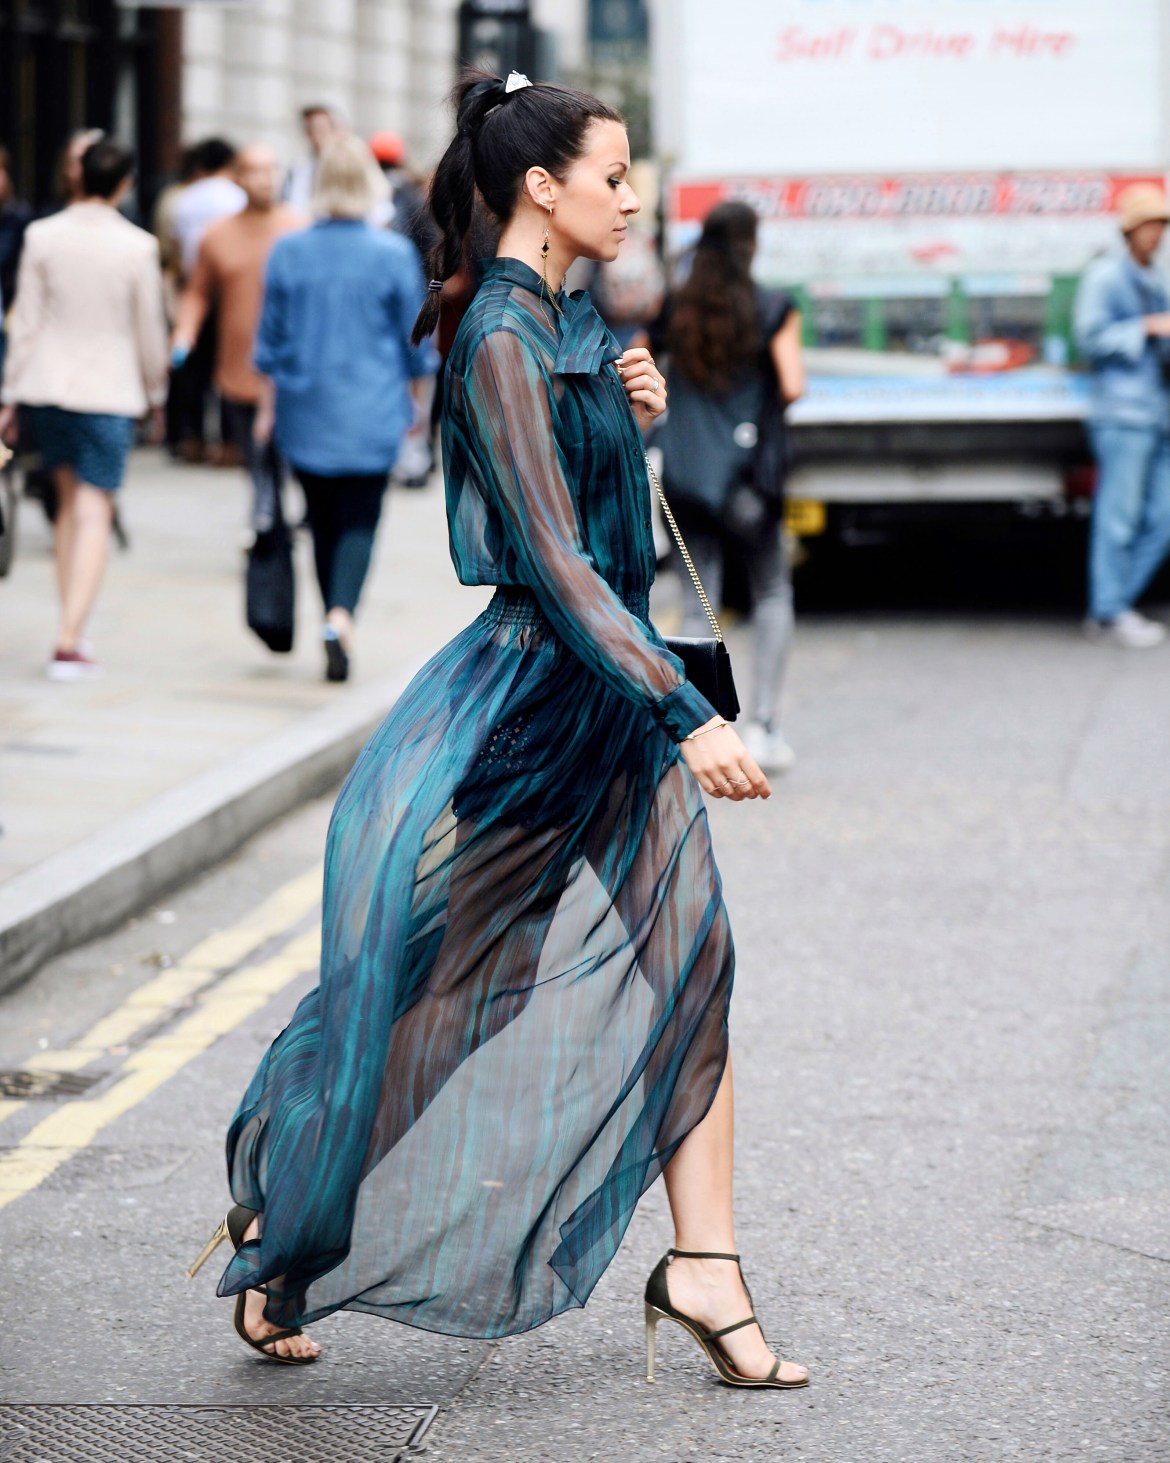 "Street beauty"  wearing a dress that is easy to see through is not very subtle - 6